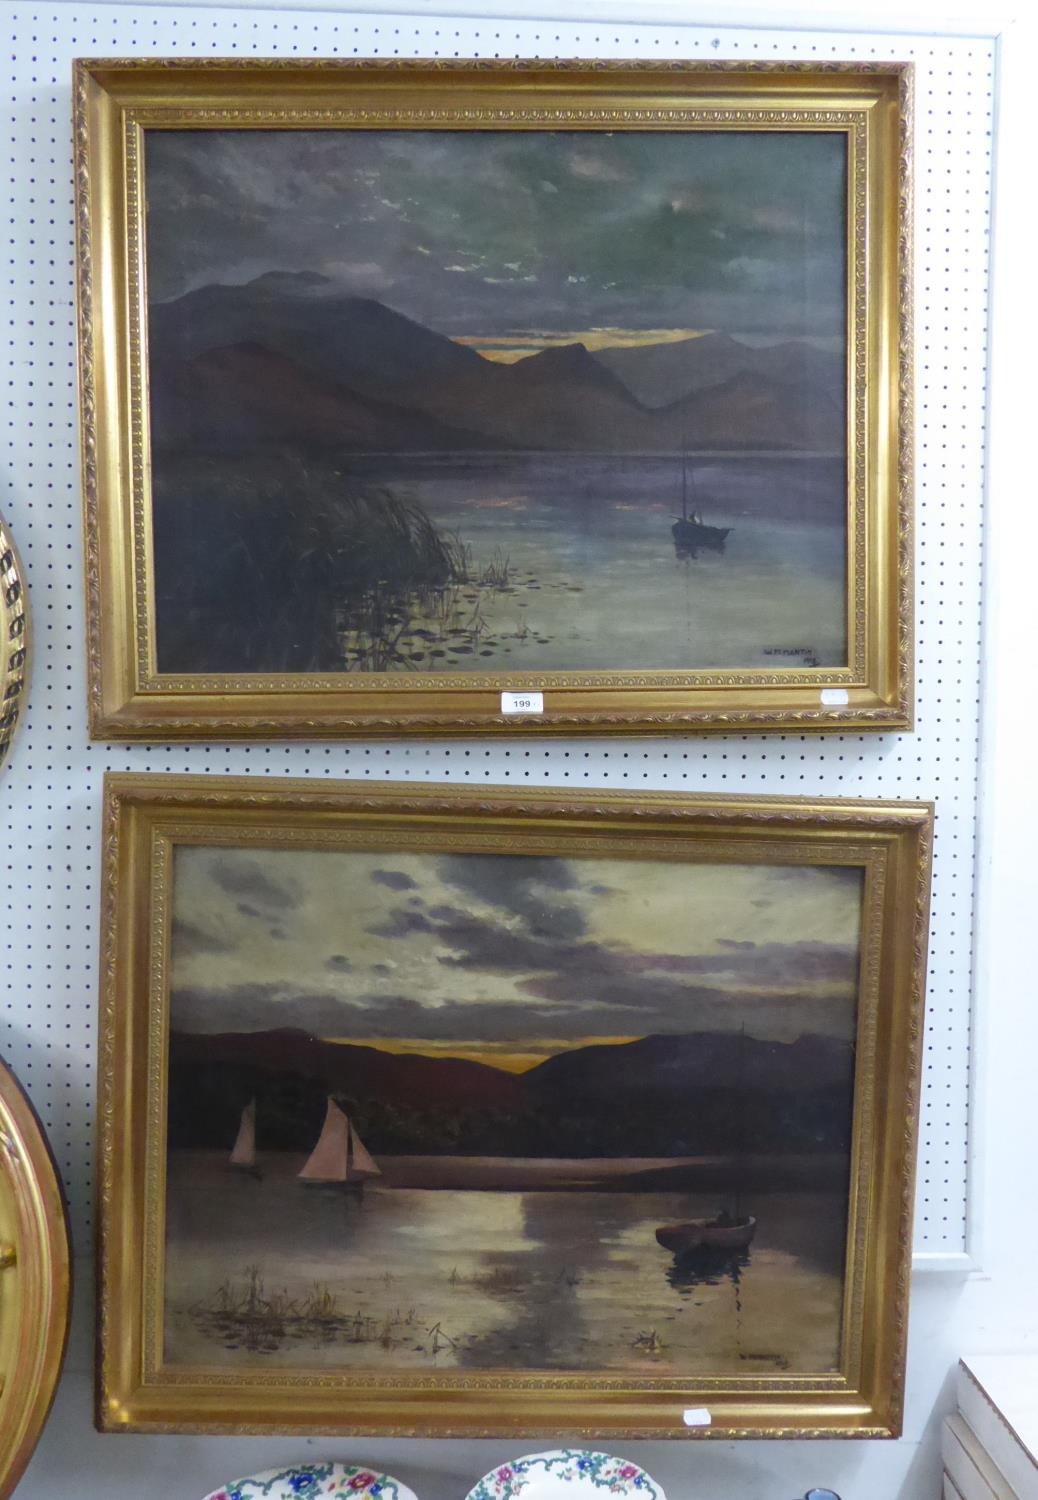 A PAIR OF OIL ON CANVAS LAKE SCENES WITH BOATS AND MOUNTAINS IN THE BACKGROUND, BY W.M. MARTIN